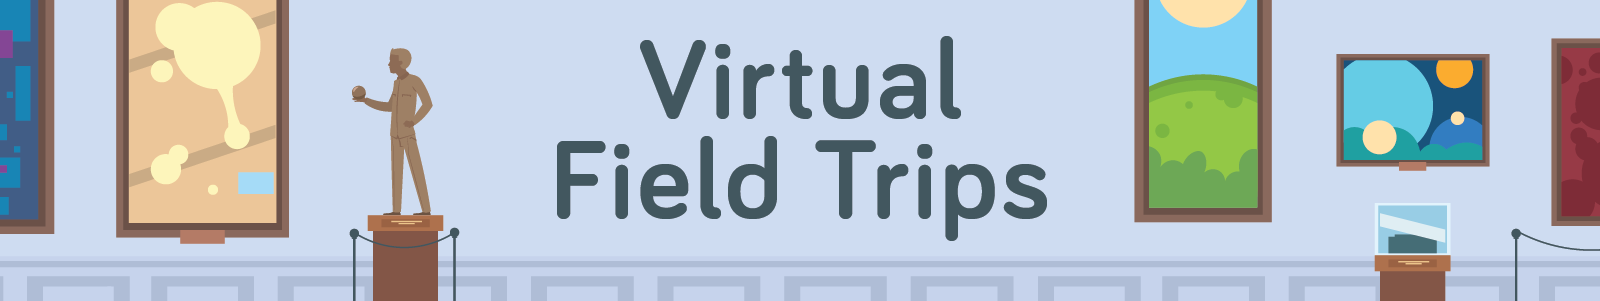 Virtual Field Trips graphic banner